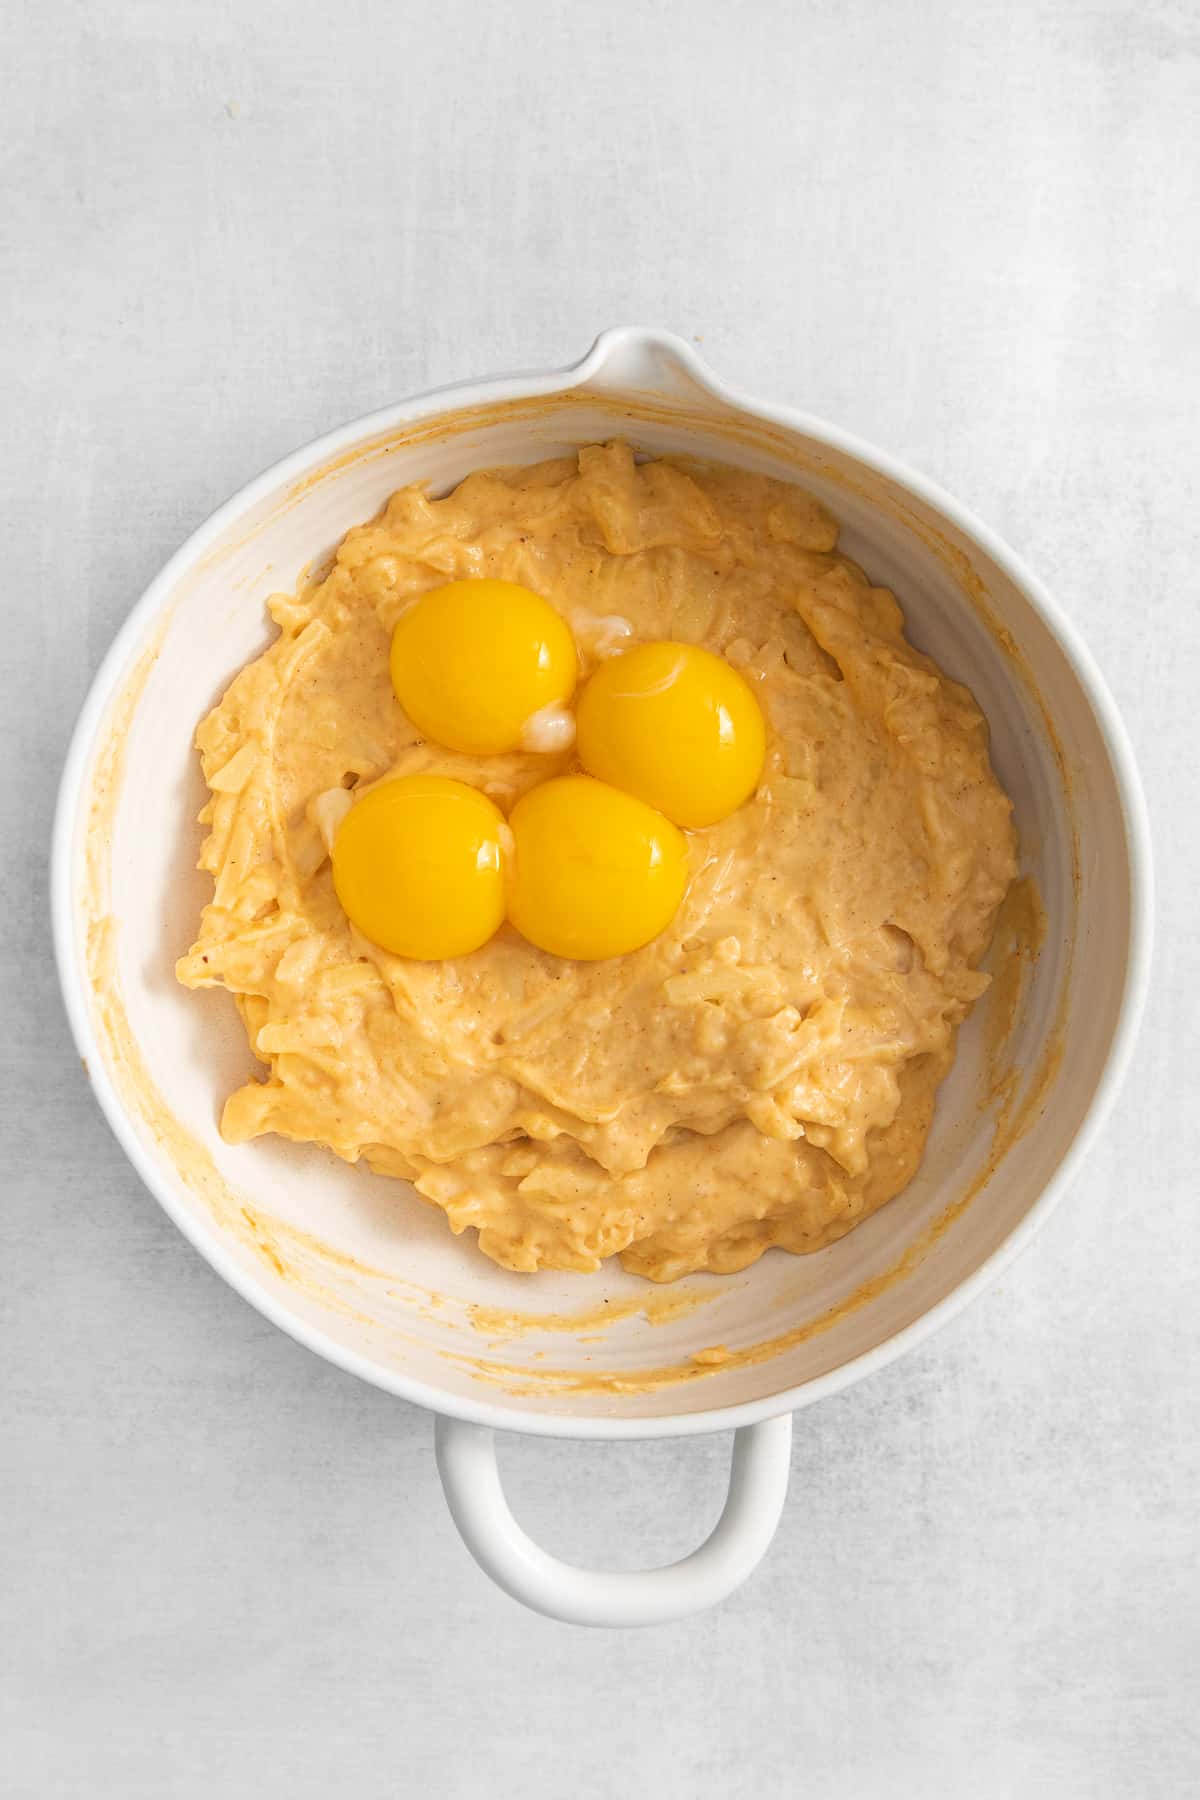 Egg yolks in a cheese souffle mixture.